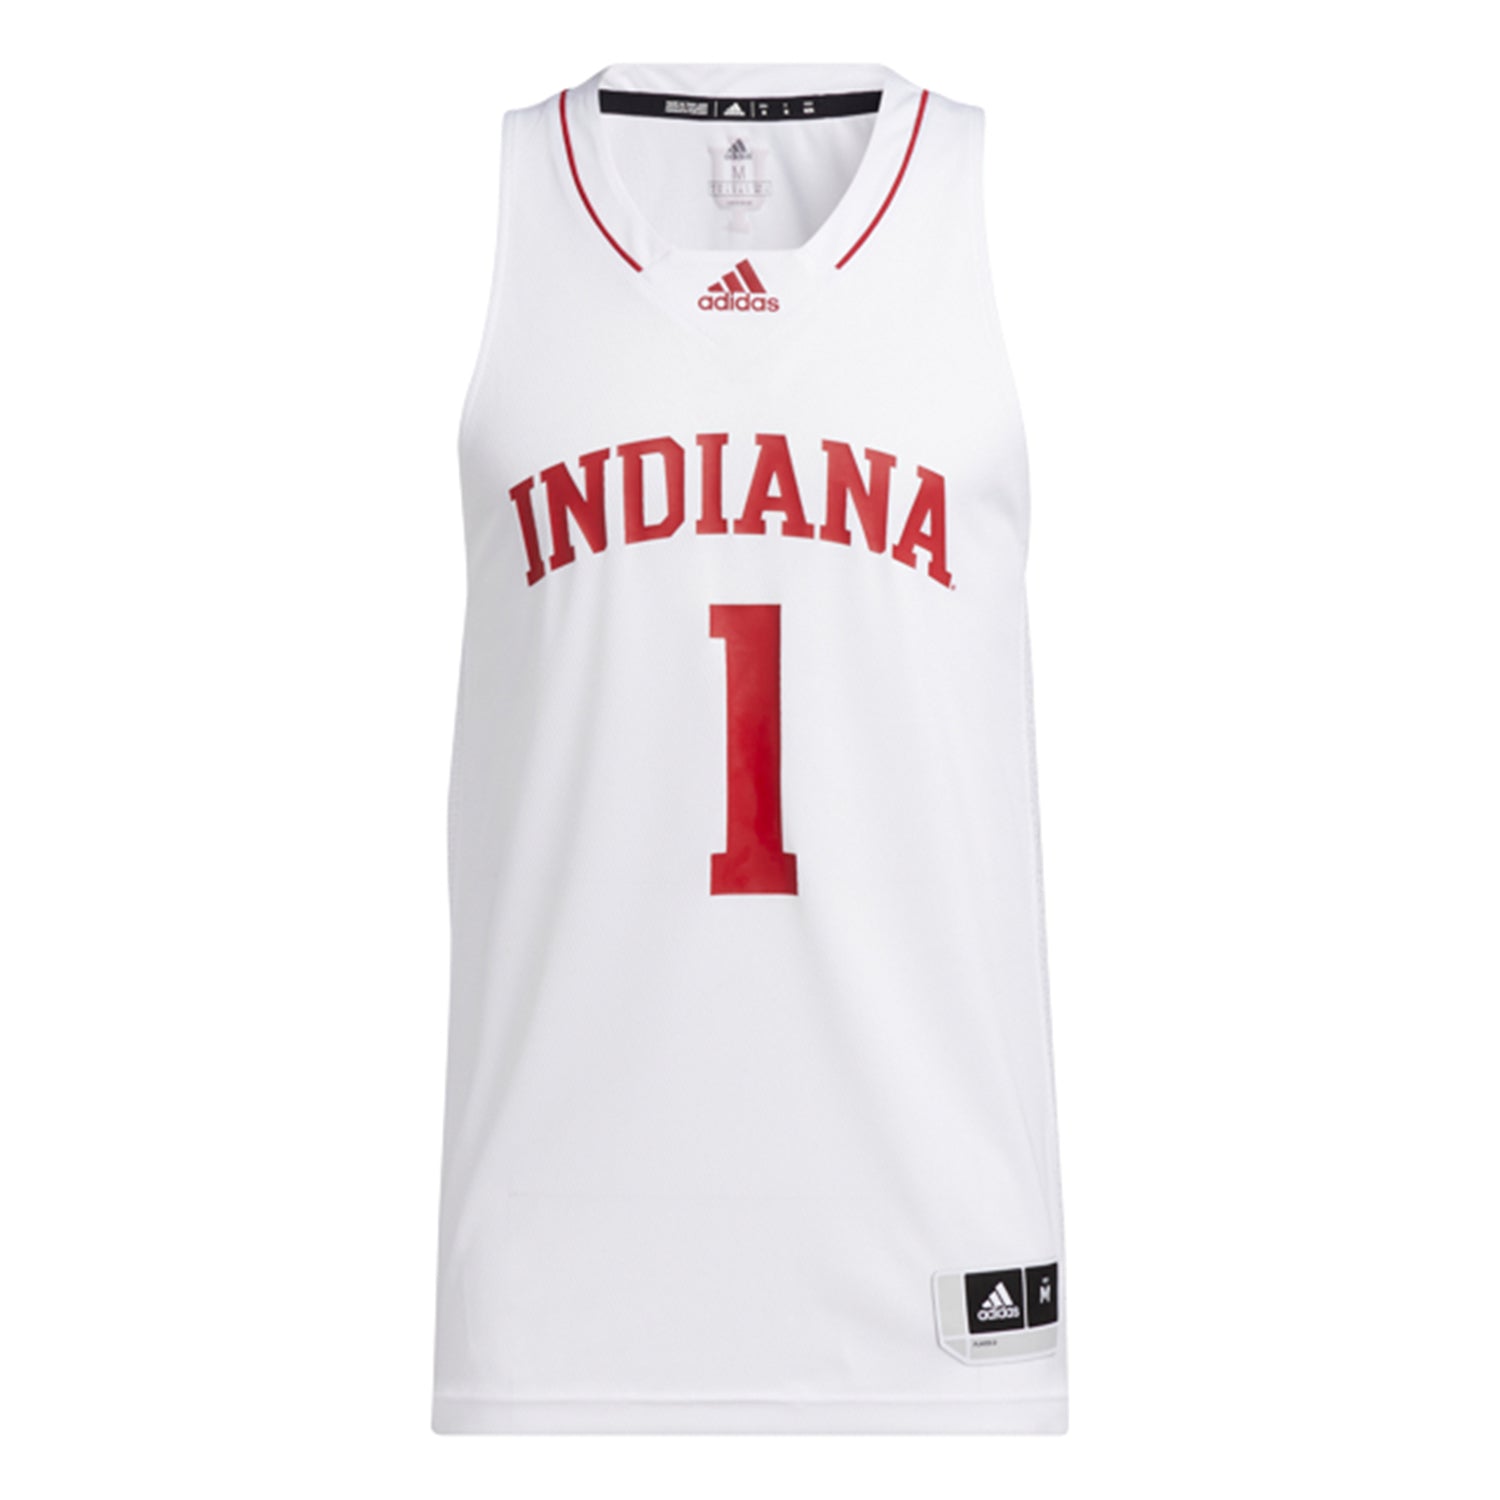 Indiana Pacers Apparel, Indiana Pacers Jerseys, Indiana Pacers Gear